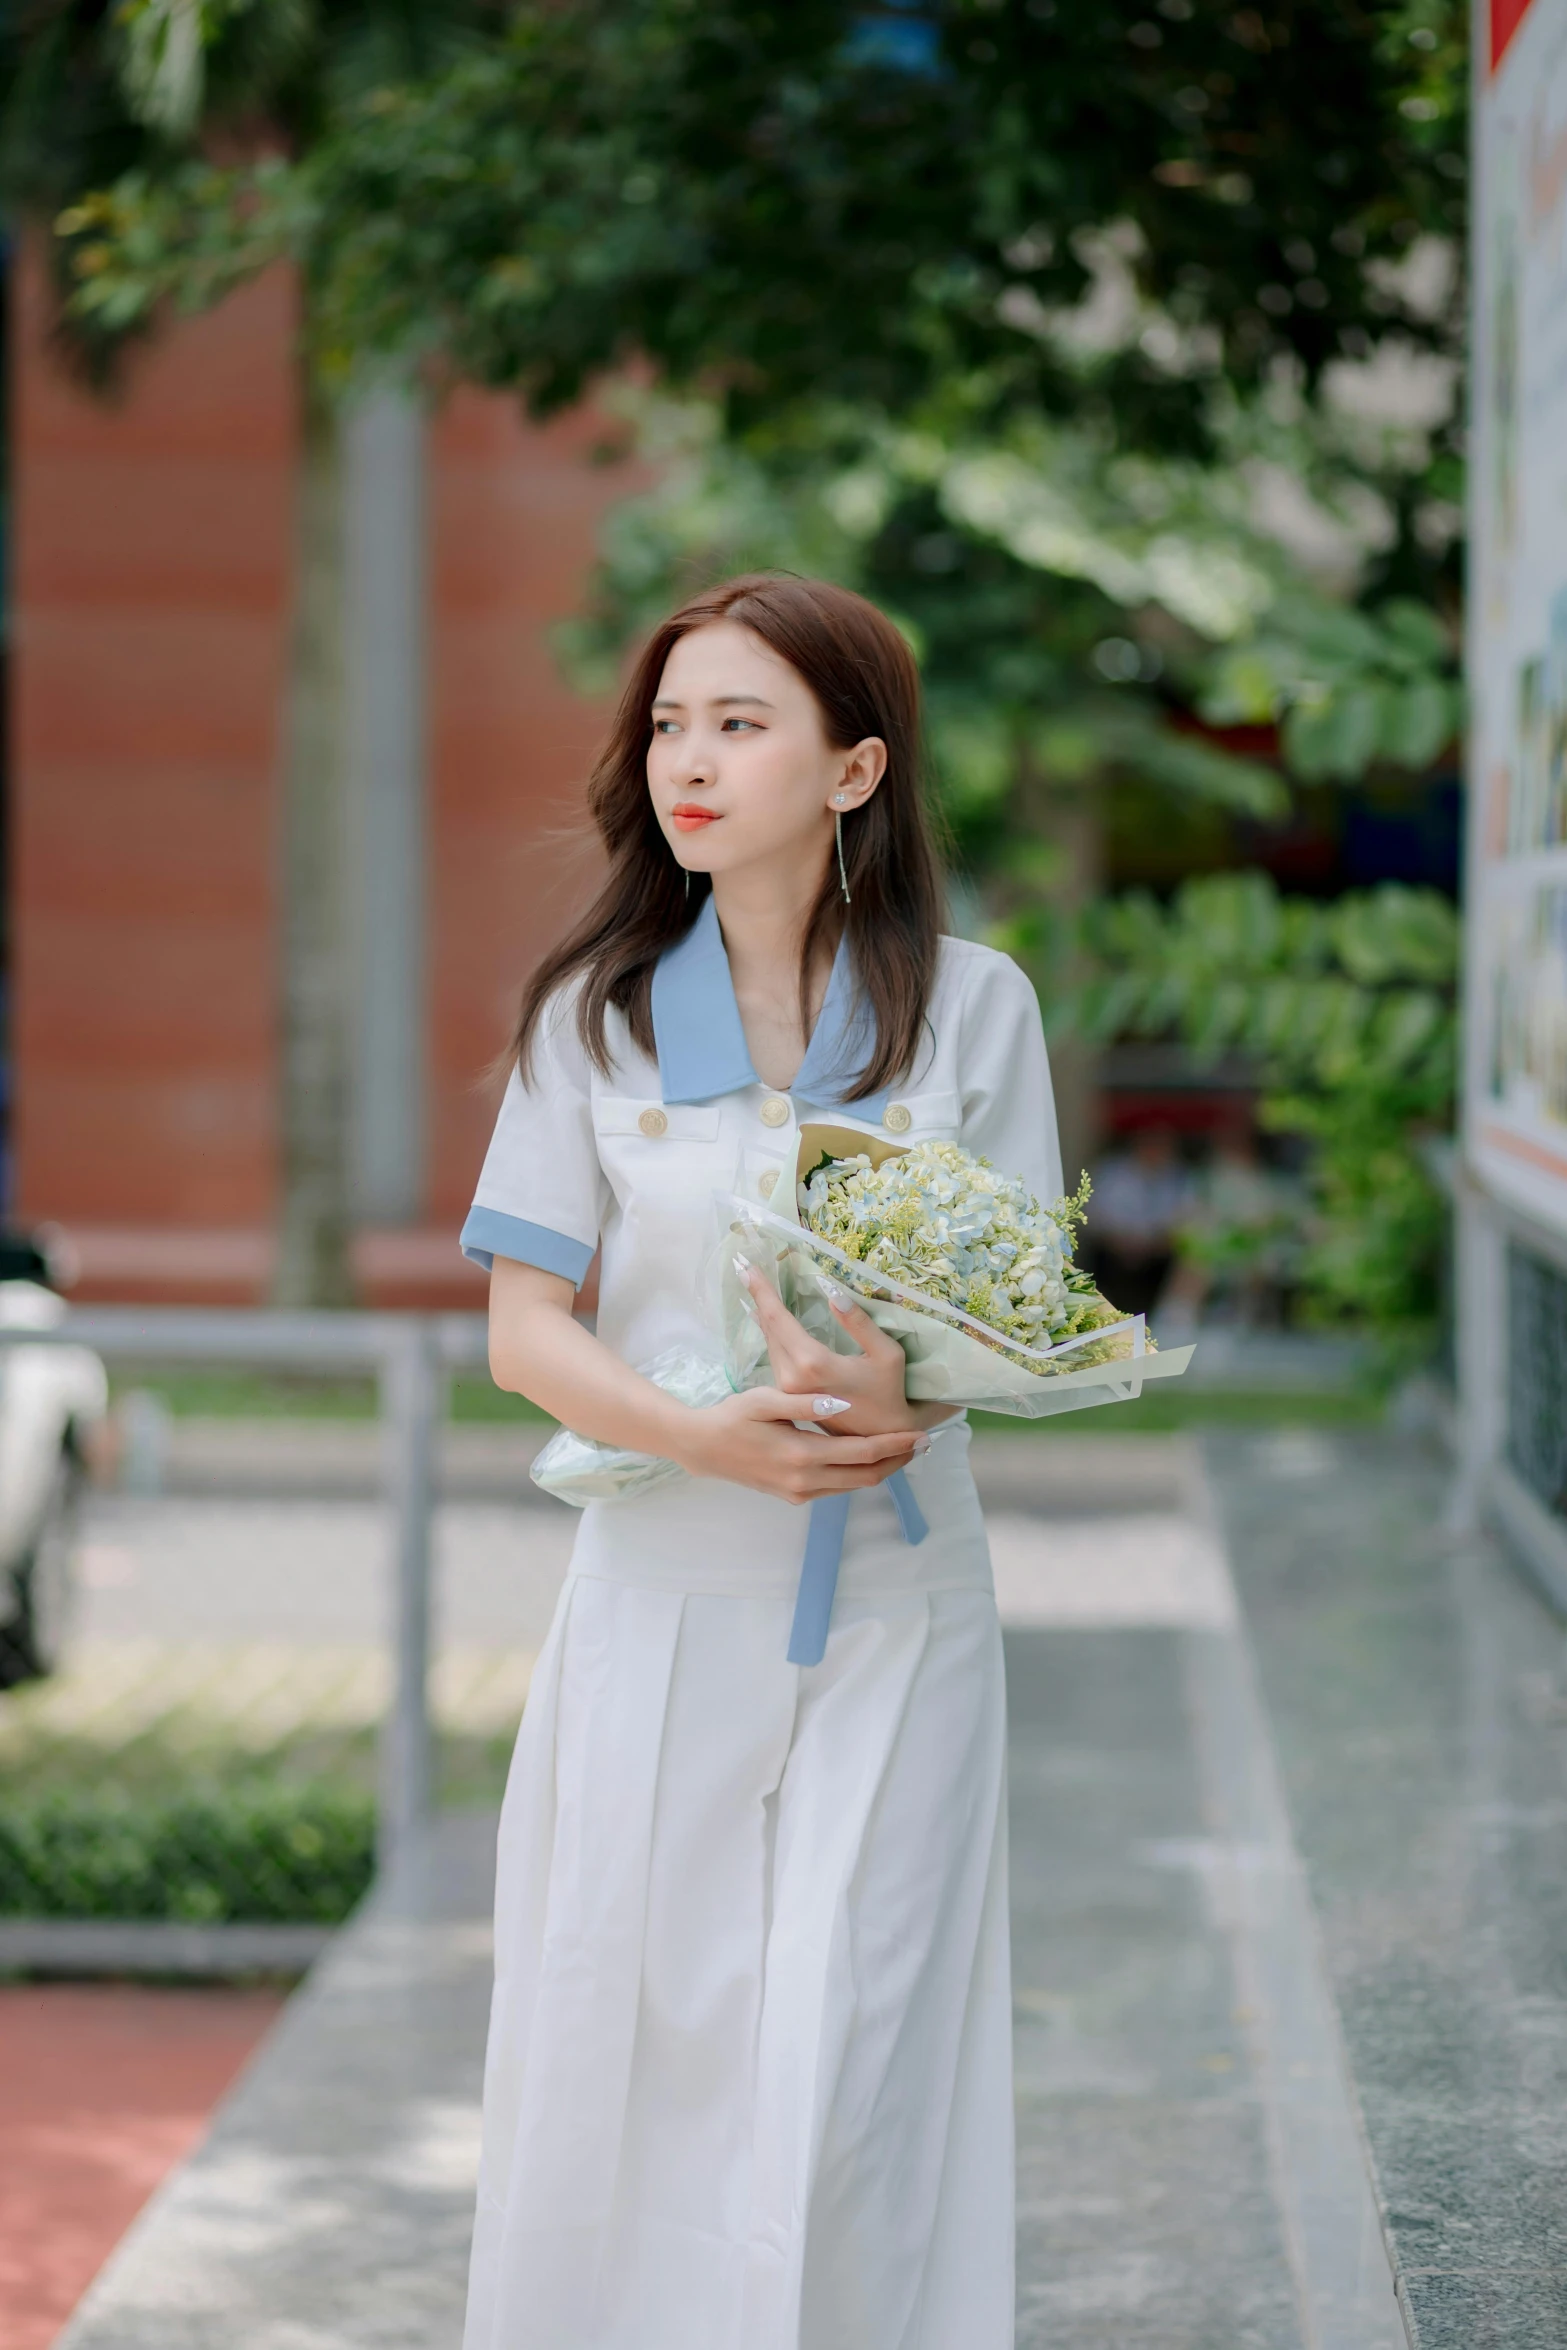 a woman dressed in white holding flowers on the street